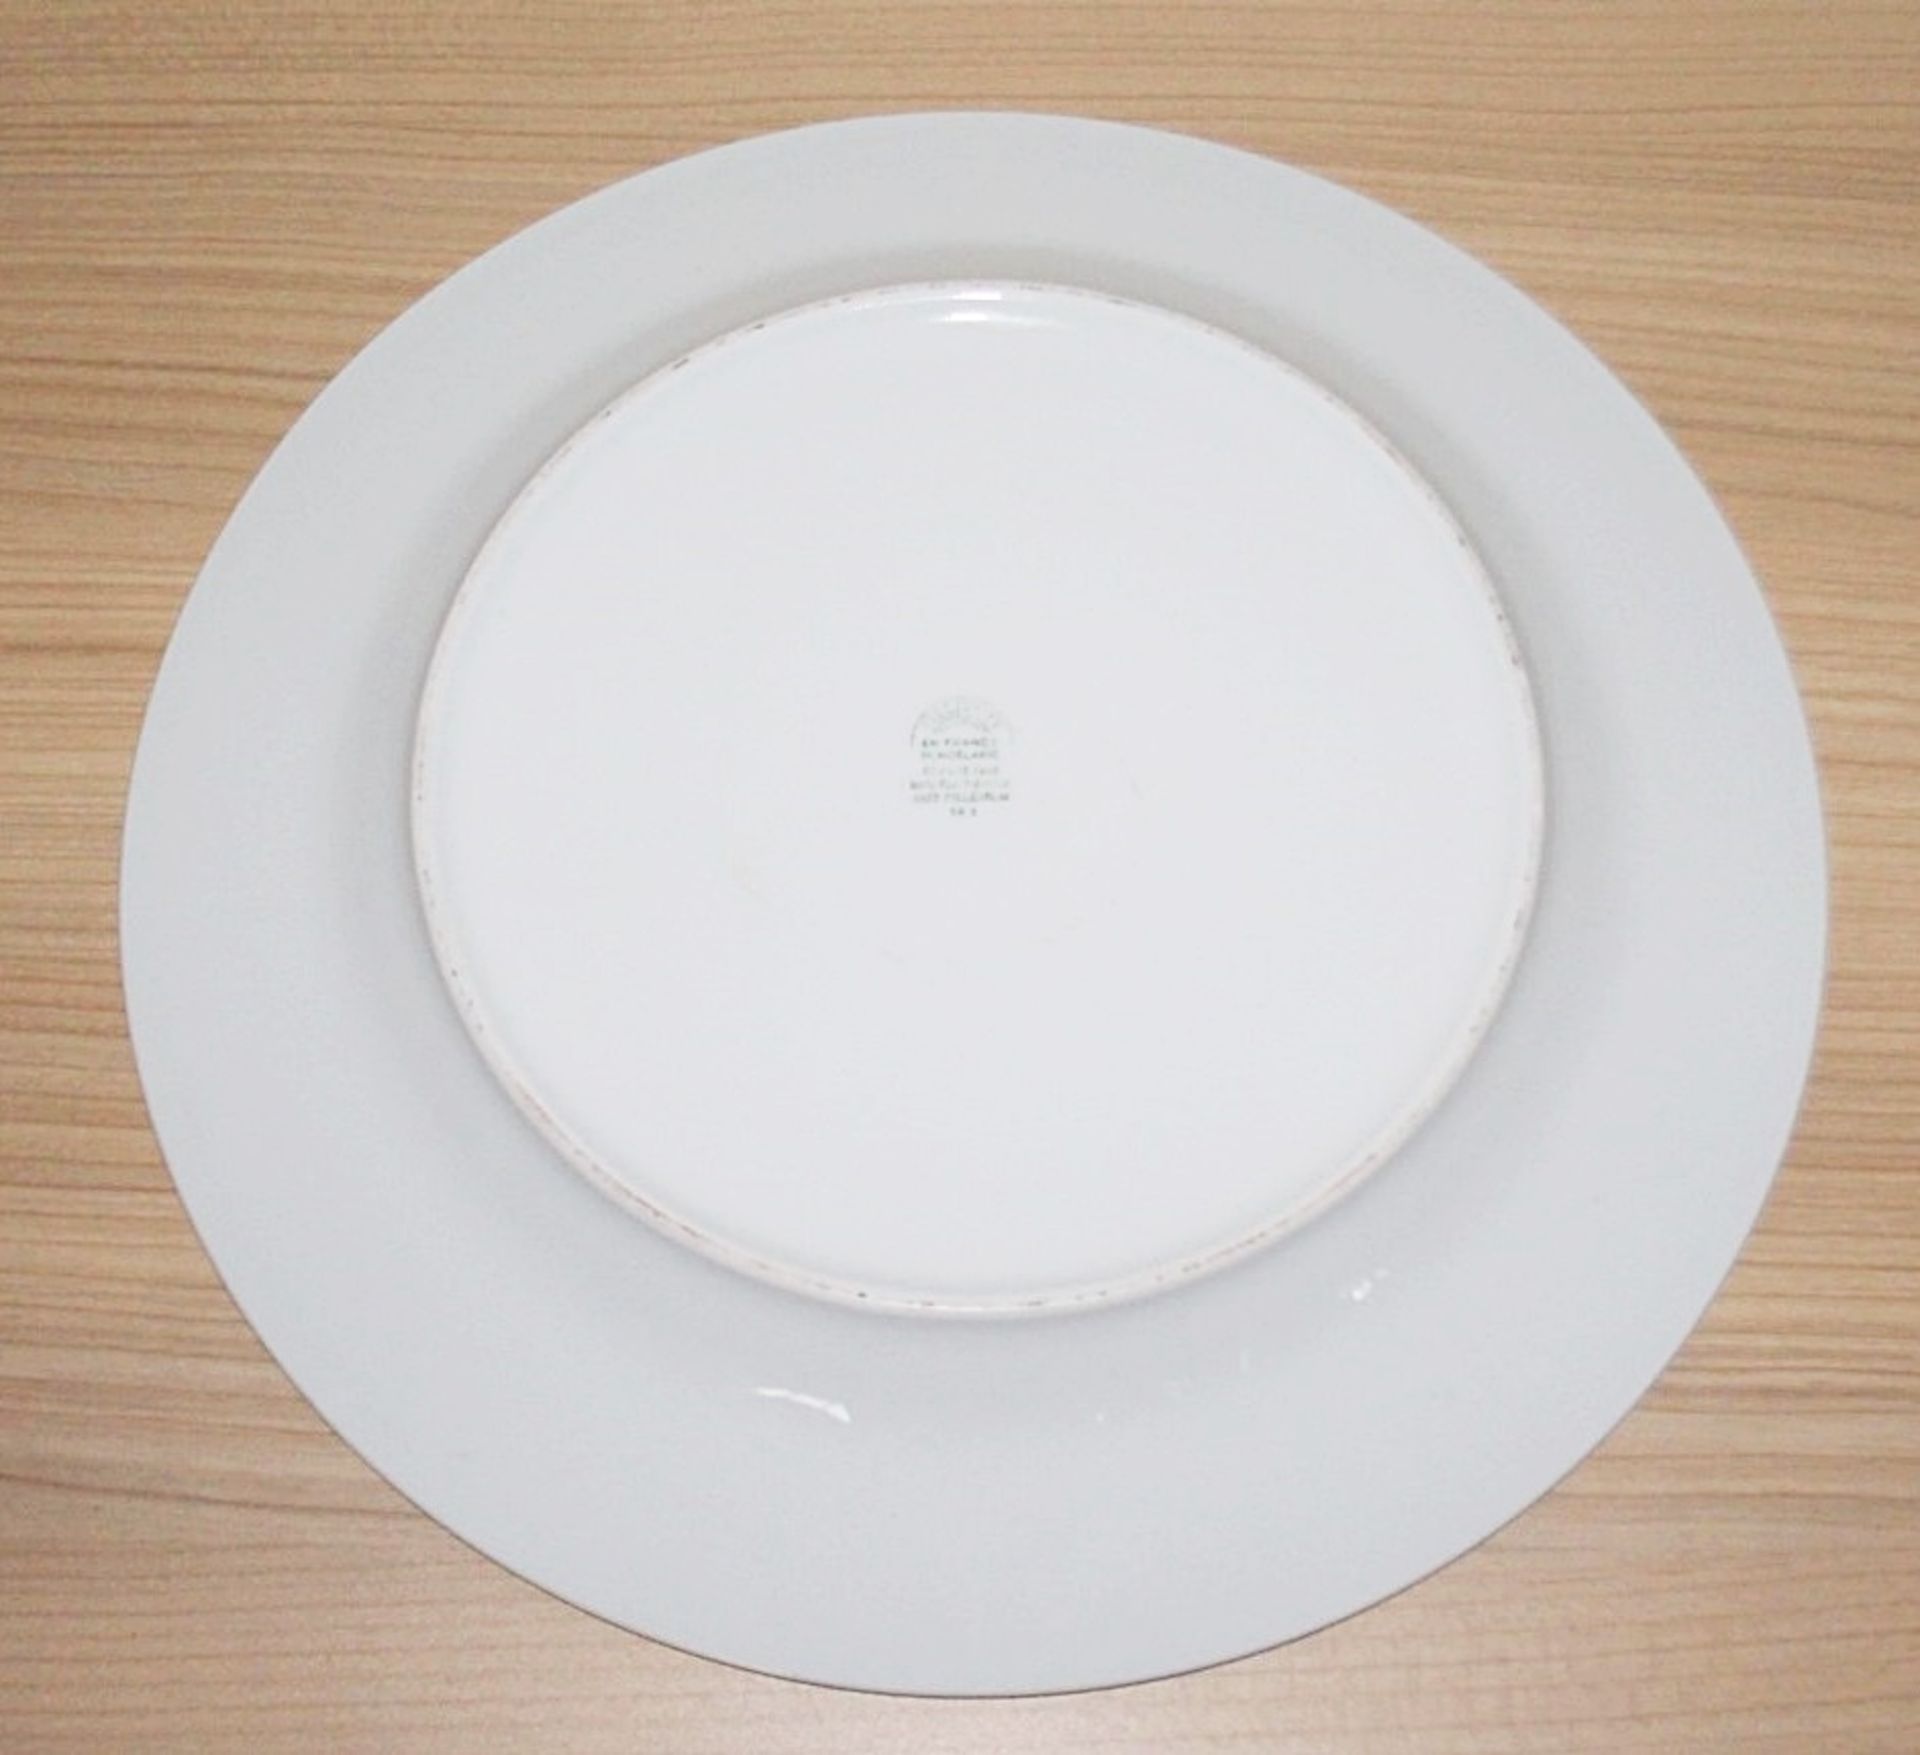 15 x PILLIVUYT Porcelain 30.4cm Large Dinner Charger Plates Featuring 'Famous Branding' In Gold - Image 4 of 5